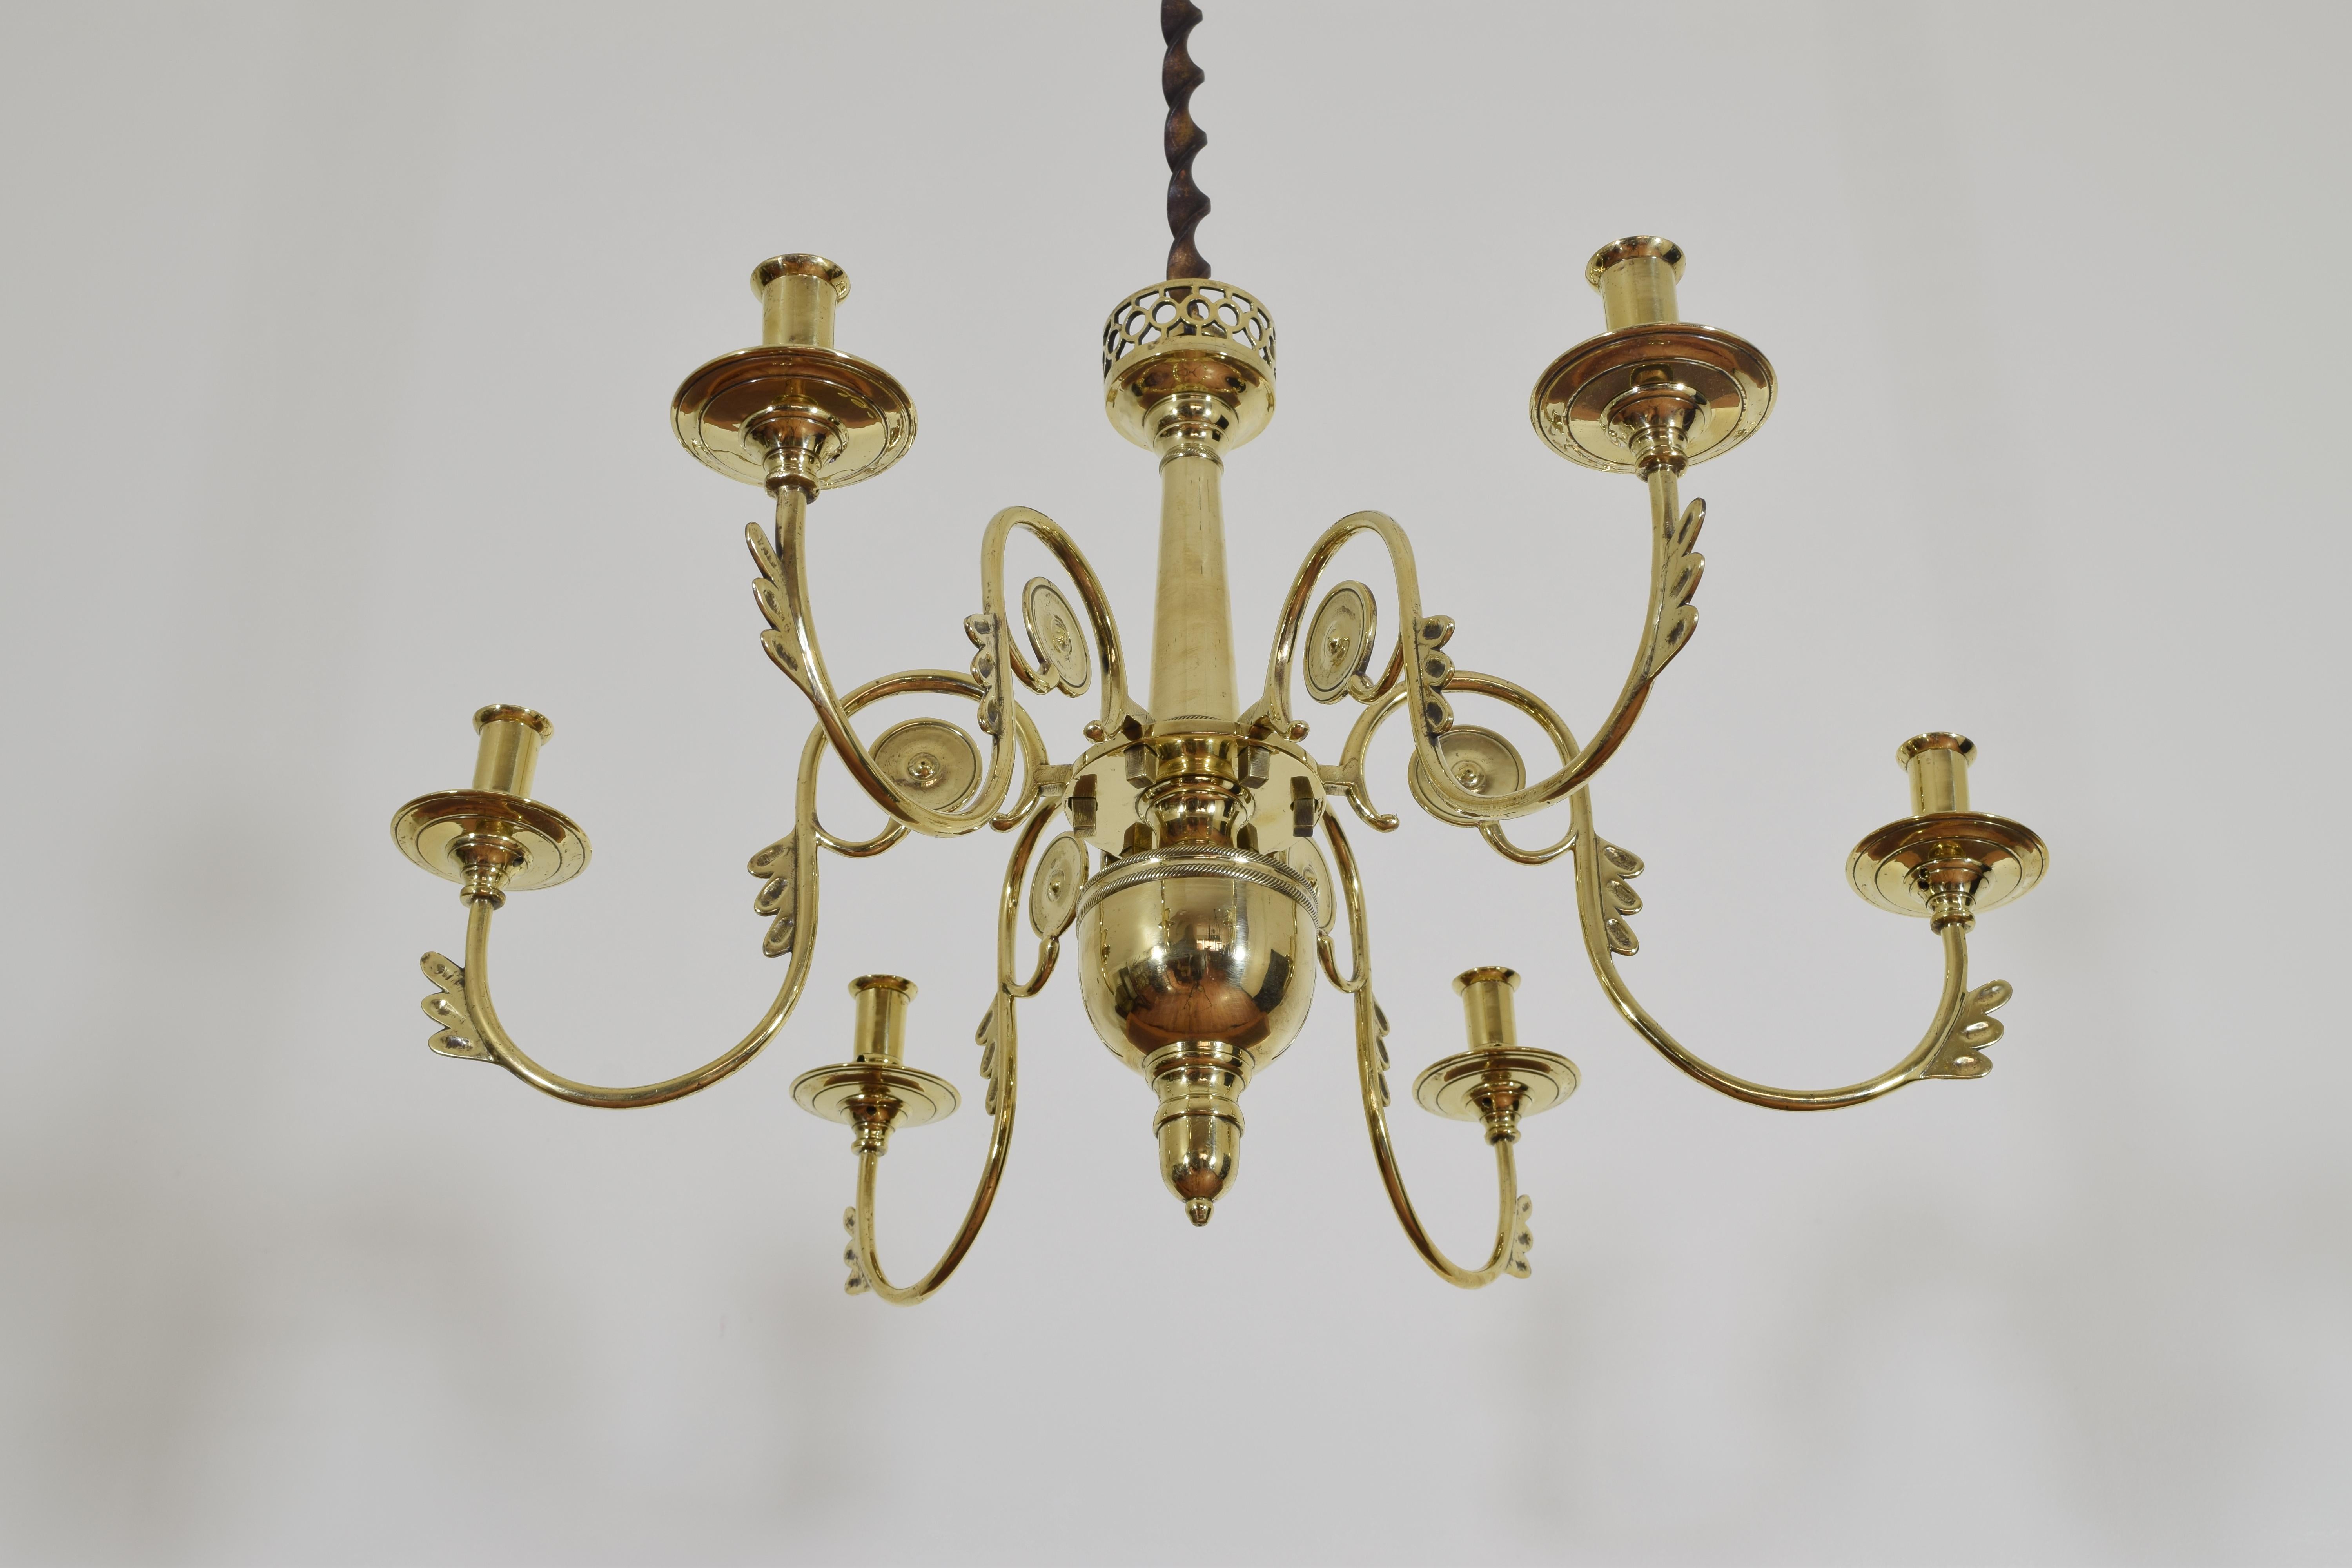 French Empire Cast Brass 6-Light Chandelier from the Early 19th Century 1